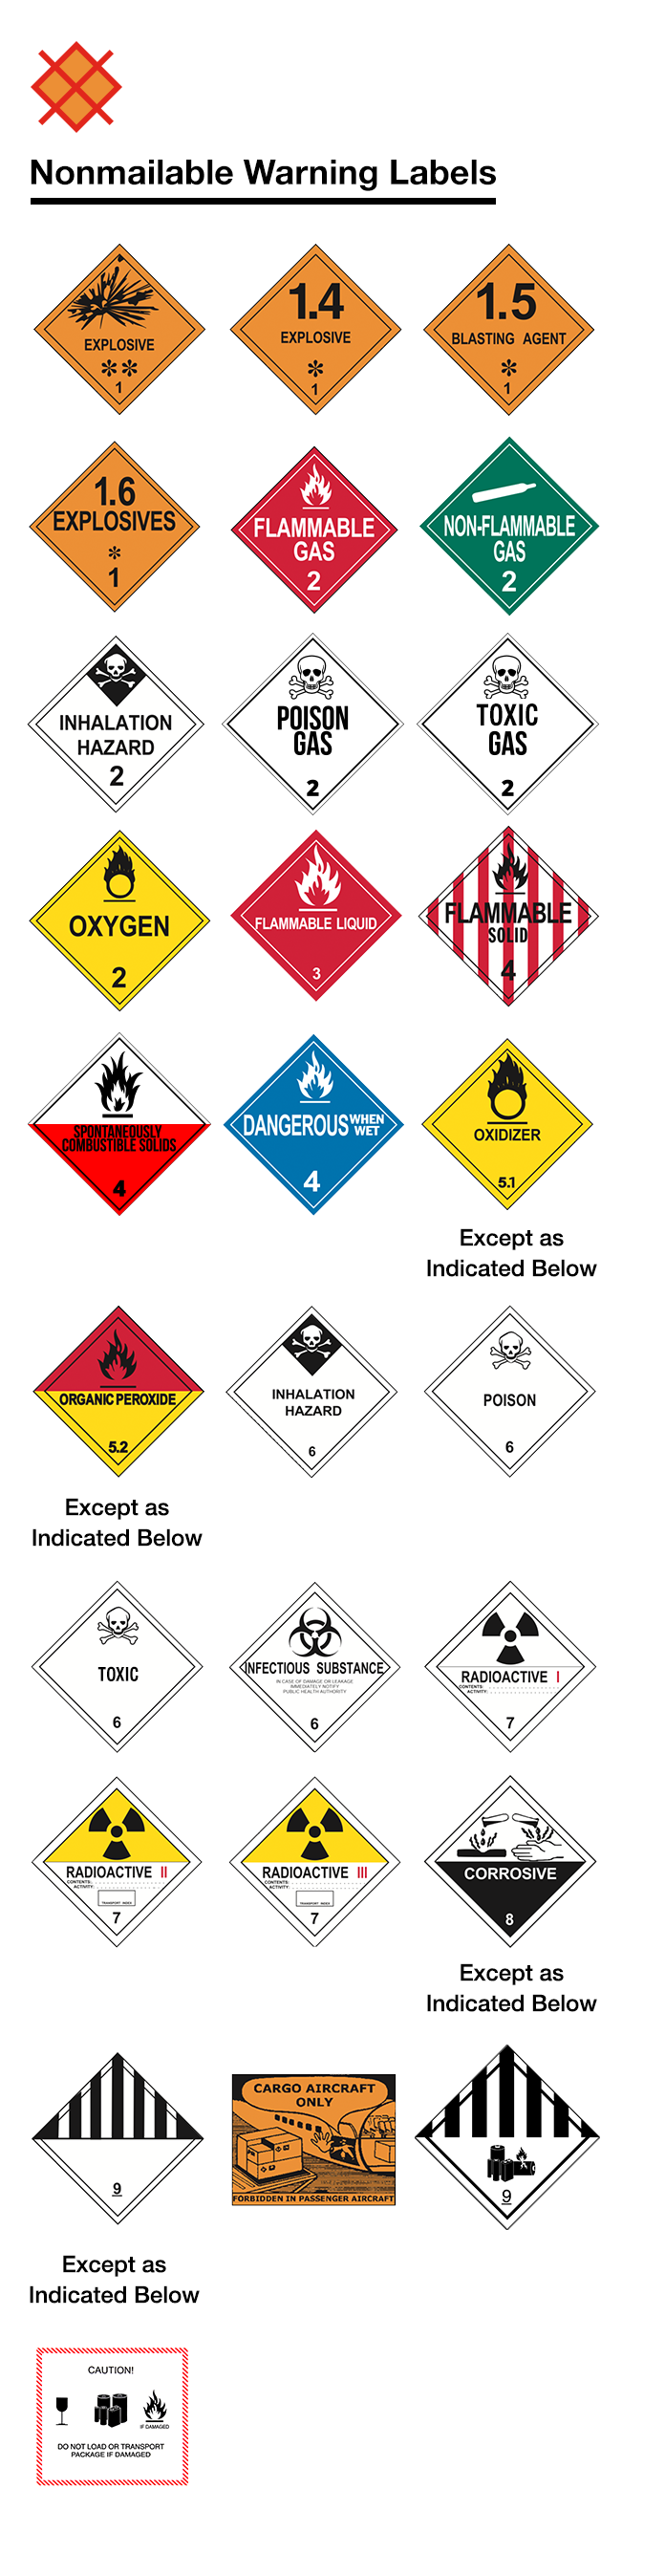 DOT hazardous materials warning labels. Labels prohibited in the mail: Basic placard for explosive materials, Division 1.4 explosive, Division 1.5 blasting agent, Division 1.6 explosives, Division 2.1 flammable gas, Division 2.2 nonflammable gas, Division 2.3 inhalation hazard, Division 2.3 poisonous gas, Division 2.3 toxic gas, Class 2 oxygen, Class 3 flammable liquid, Division 4.1 flammable solid, Division 4.2 spontaneously combustible solid, Division 4.3 dangerous when wet, Division 5.1 oxidizer, Division 5.2 organic peroxide, Division 6.1 inhalation hazard, Division 6.1 poison, Division 6.1 toxic, Division 6.1 infectious substance, Division 7.1 radioactive white 1, Division 7.2 radioactive yellow 2, Division 7.3 radioactive yellow 3, Class 8 corrosive, Class 9 miscellaneous hazardous materials, cargo aircraft only, and Class 9 lithium battery, and lithium ion battery and/or lithium metal battery “do not load or transport package if damaged.”